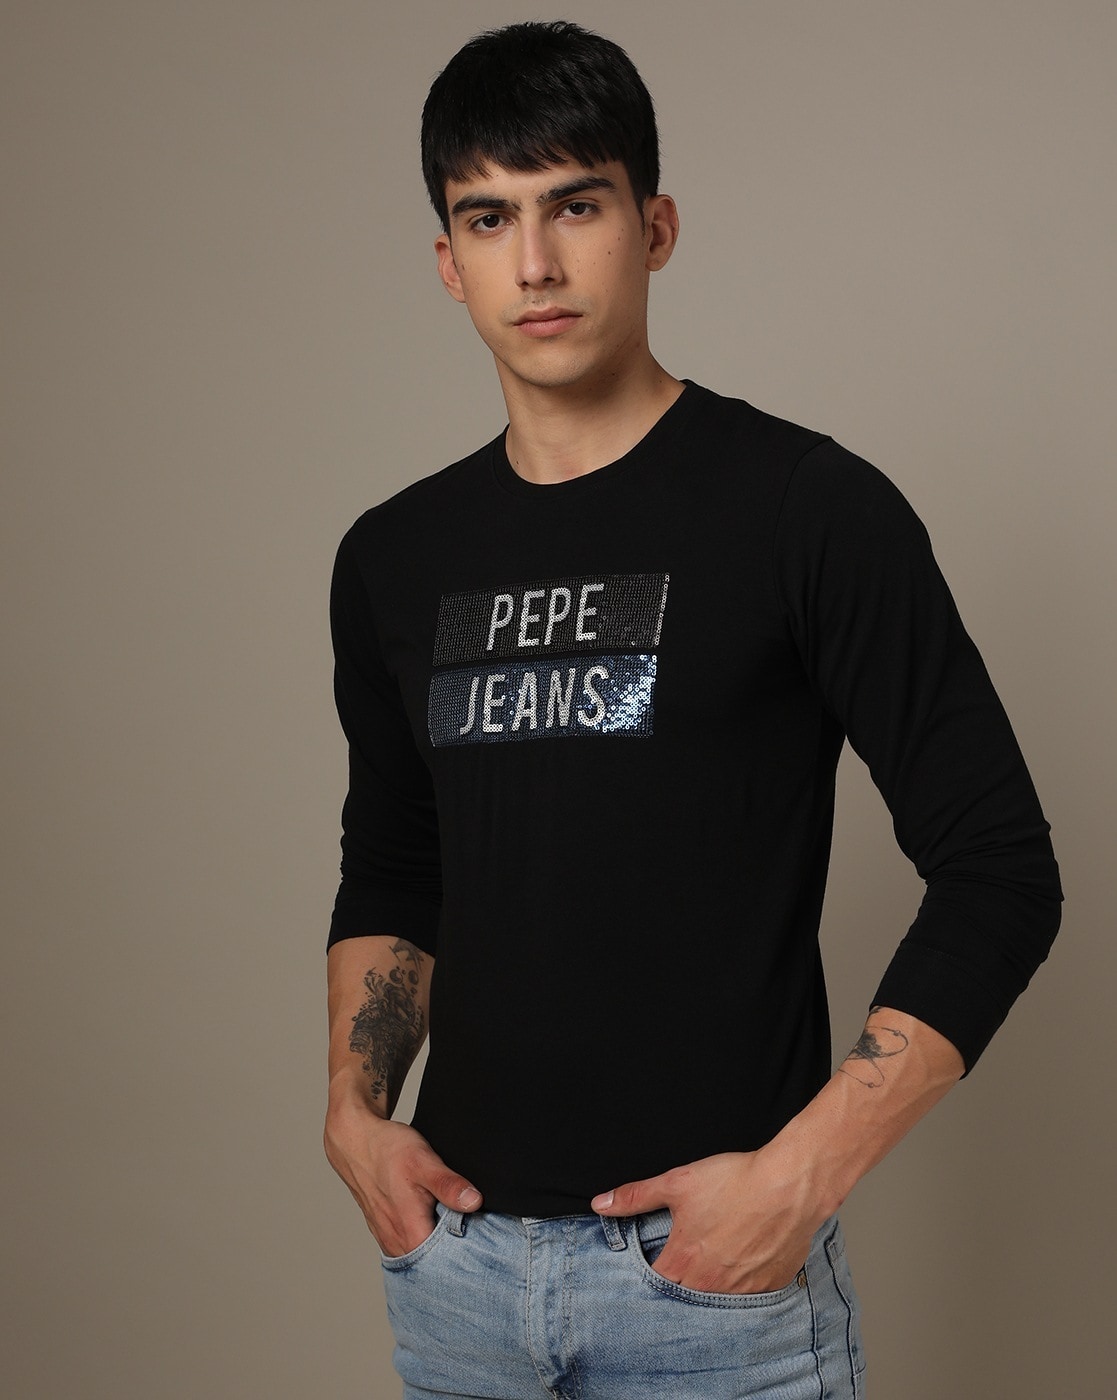 Buy Black Tshirts for Men by Pepe Jeans Online